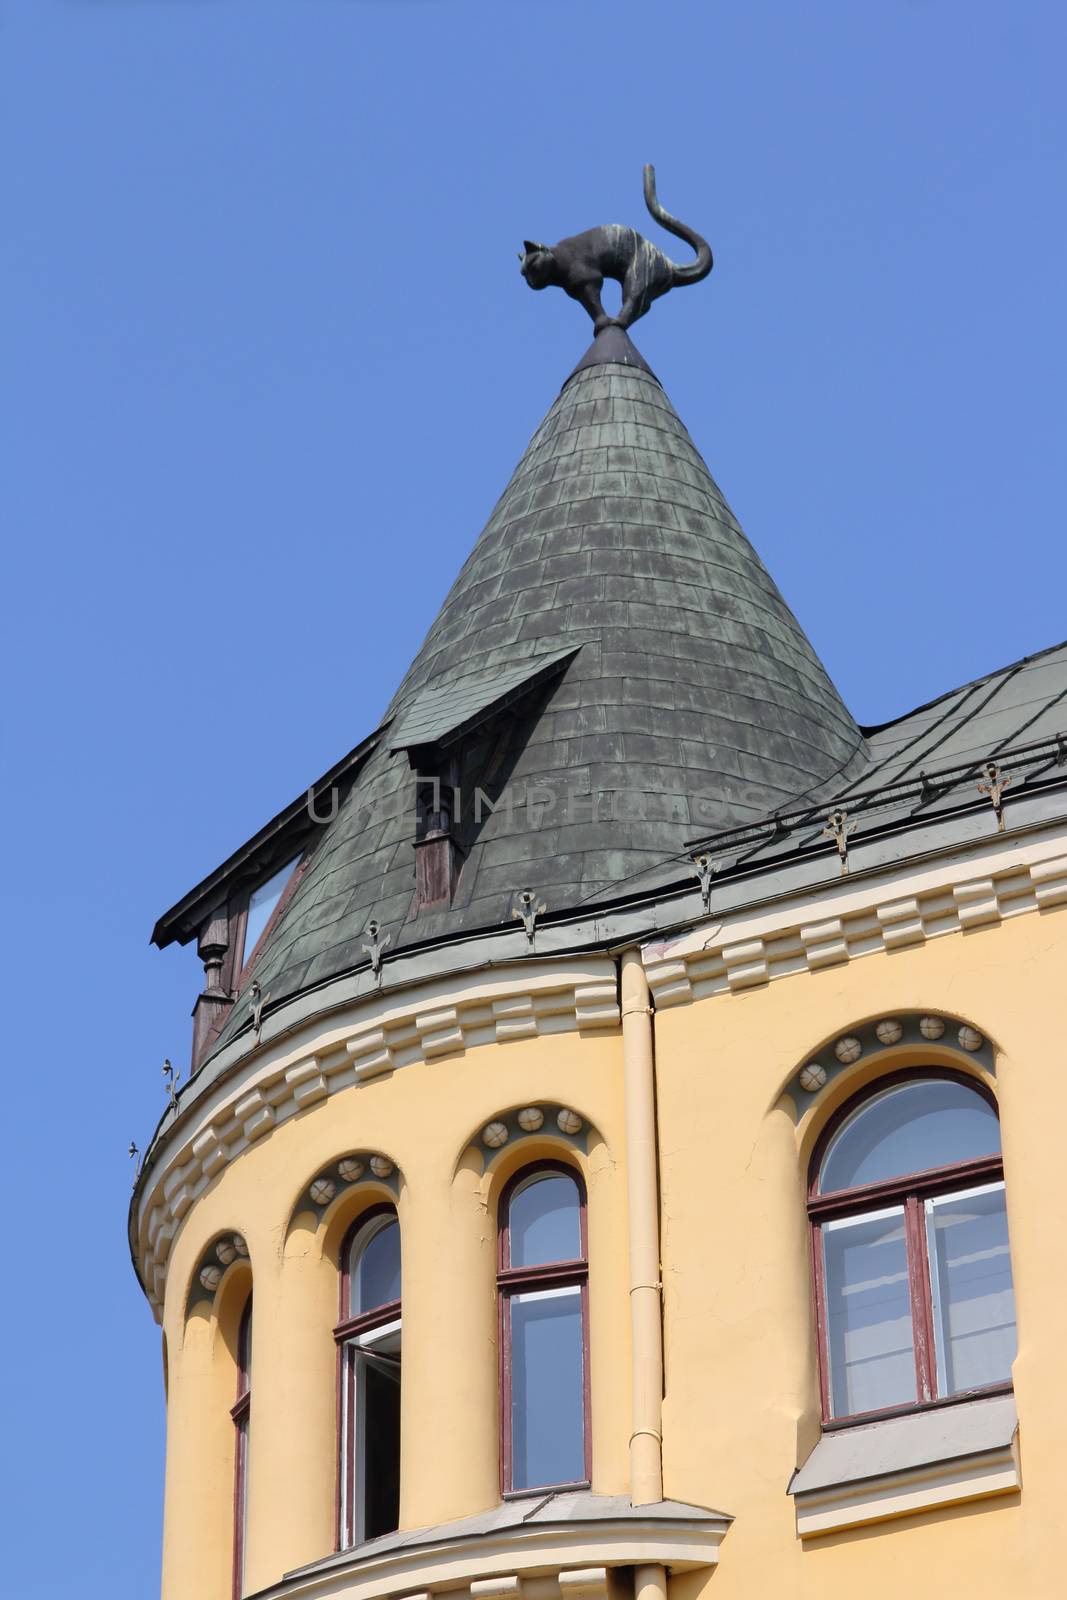 Roof ornamentation with a cat sculpture in old Riga, Latvia